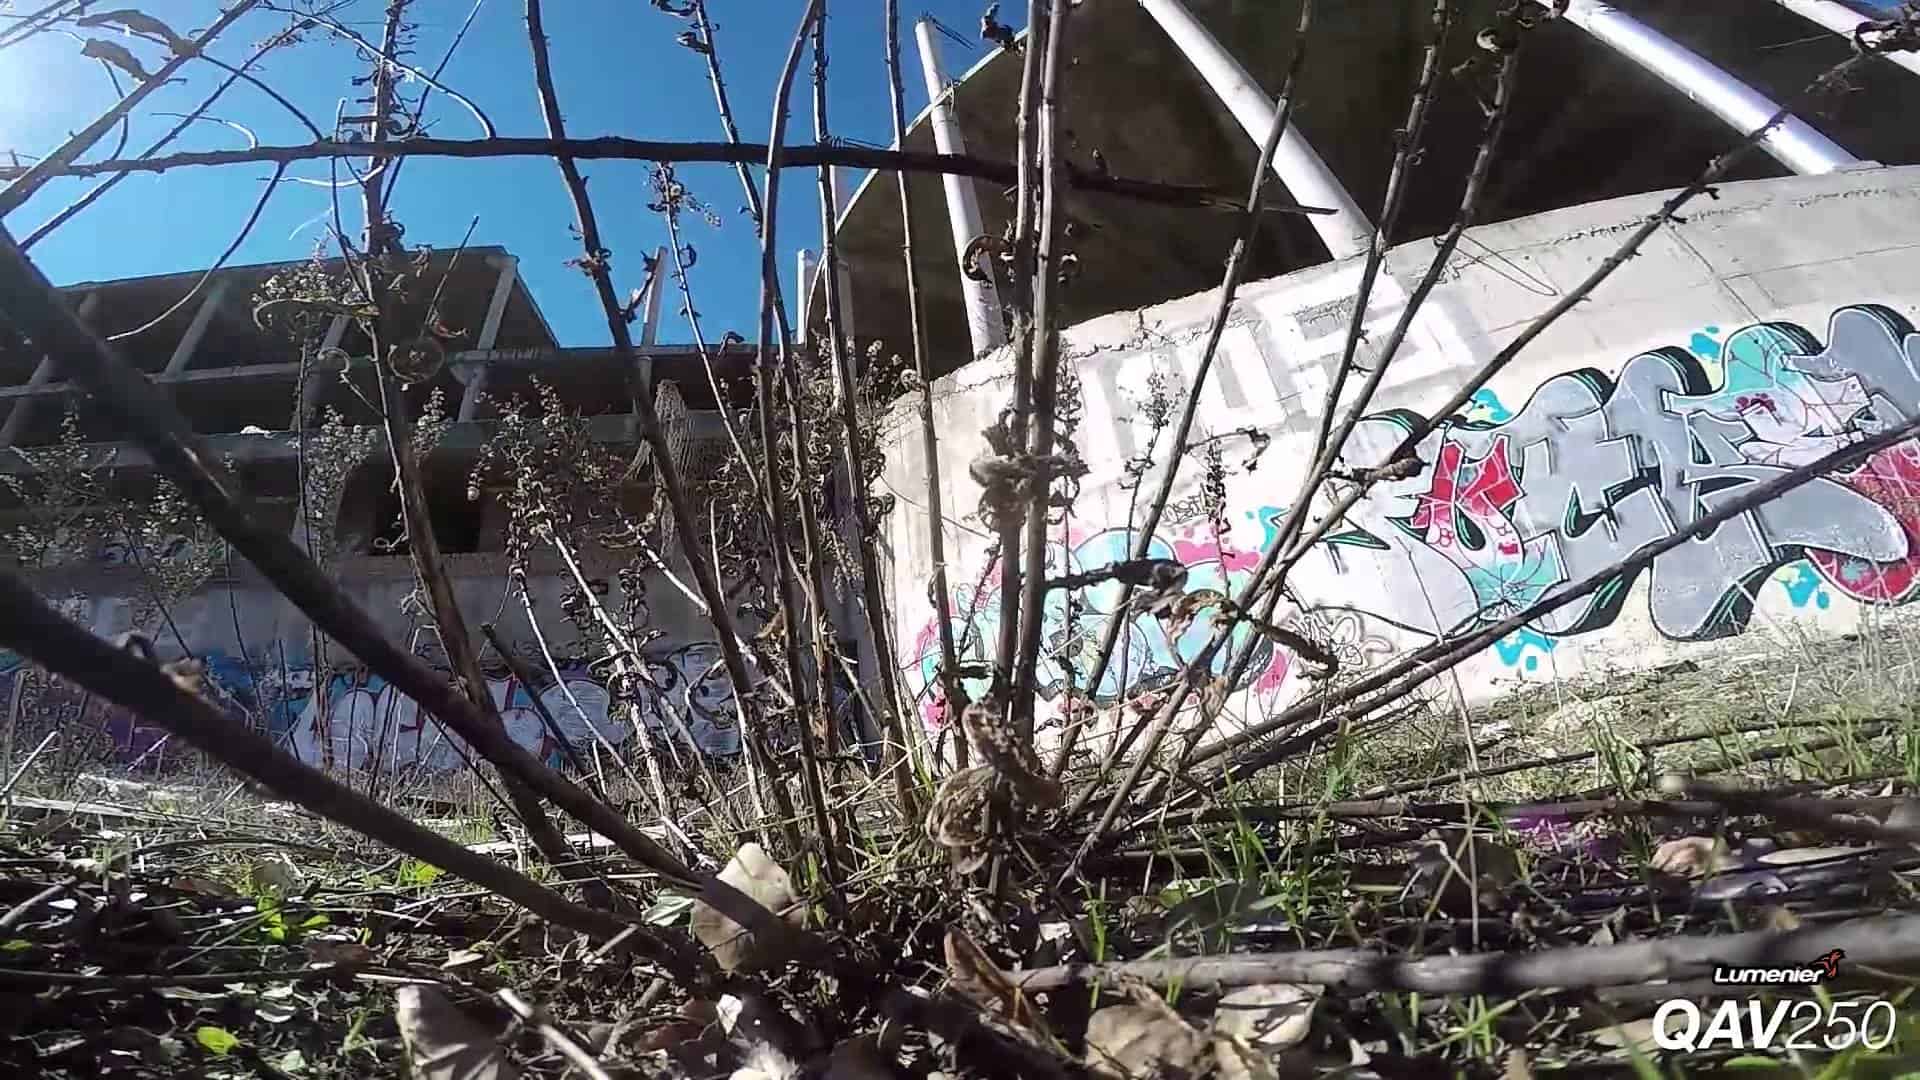 Left Behind: drone races through ruined buildings